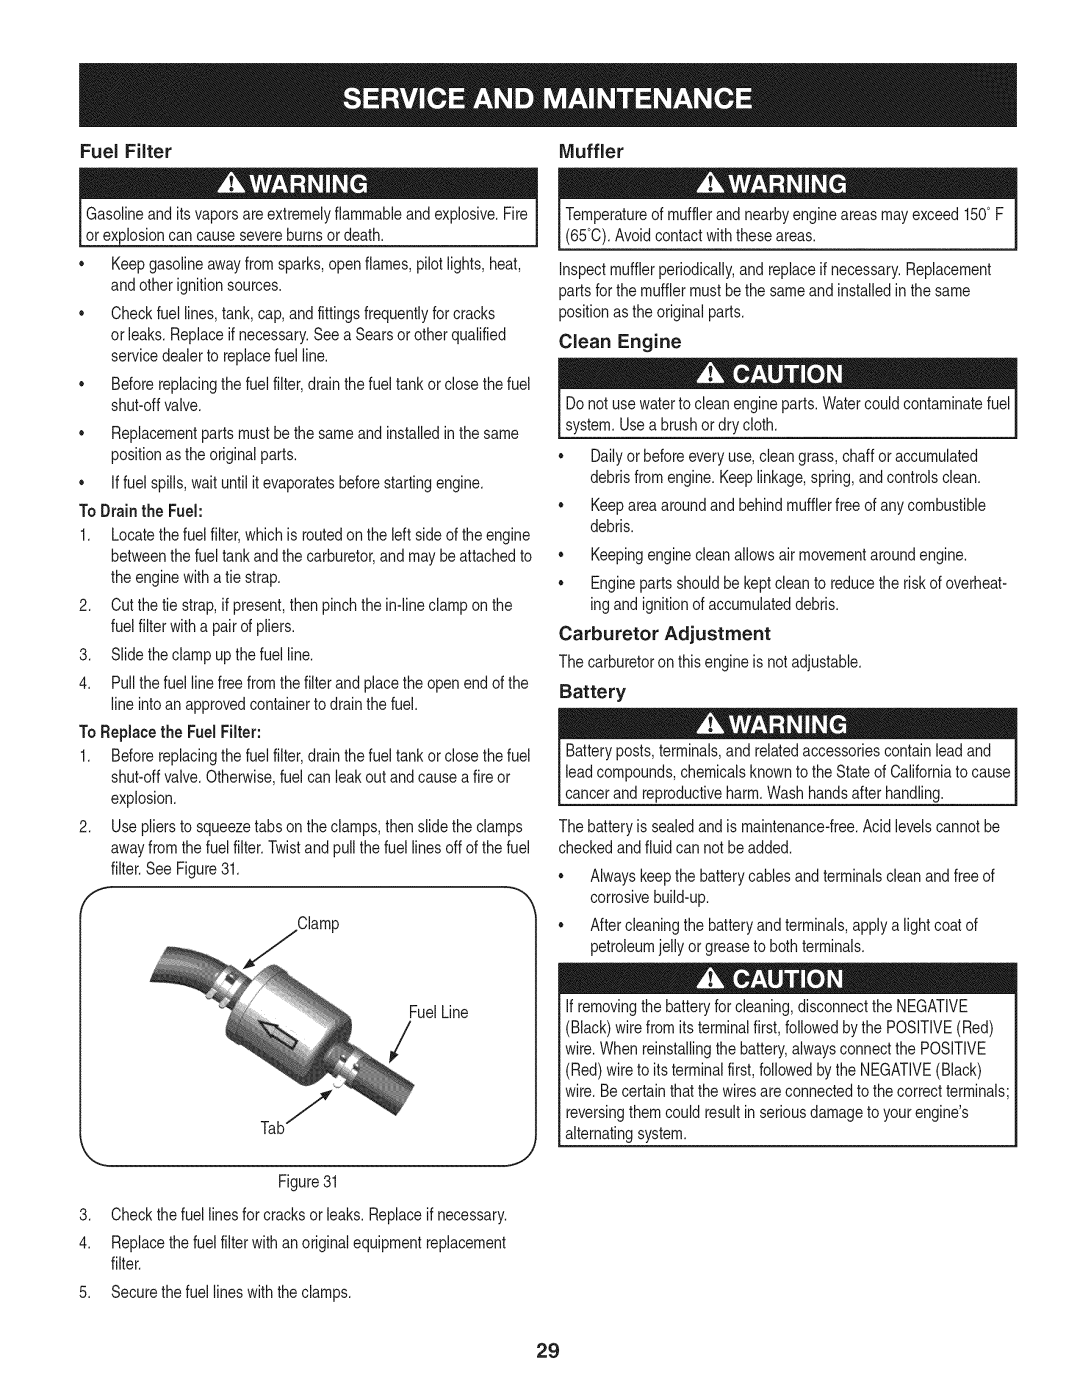 Craftsman 247.28984, PGT9000 manual Fuel Filter, To Drainthe Fuel, Muffler, Clean Engine 